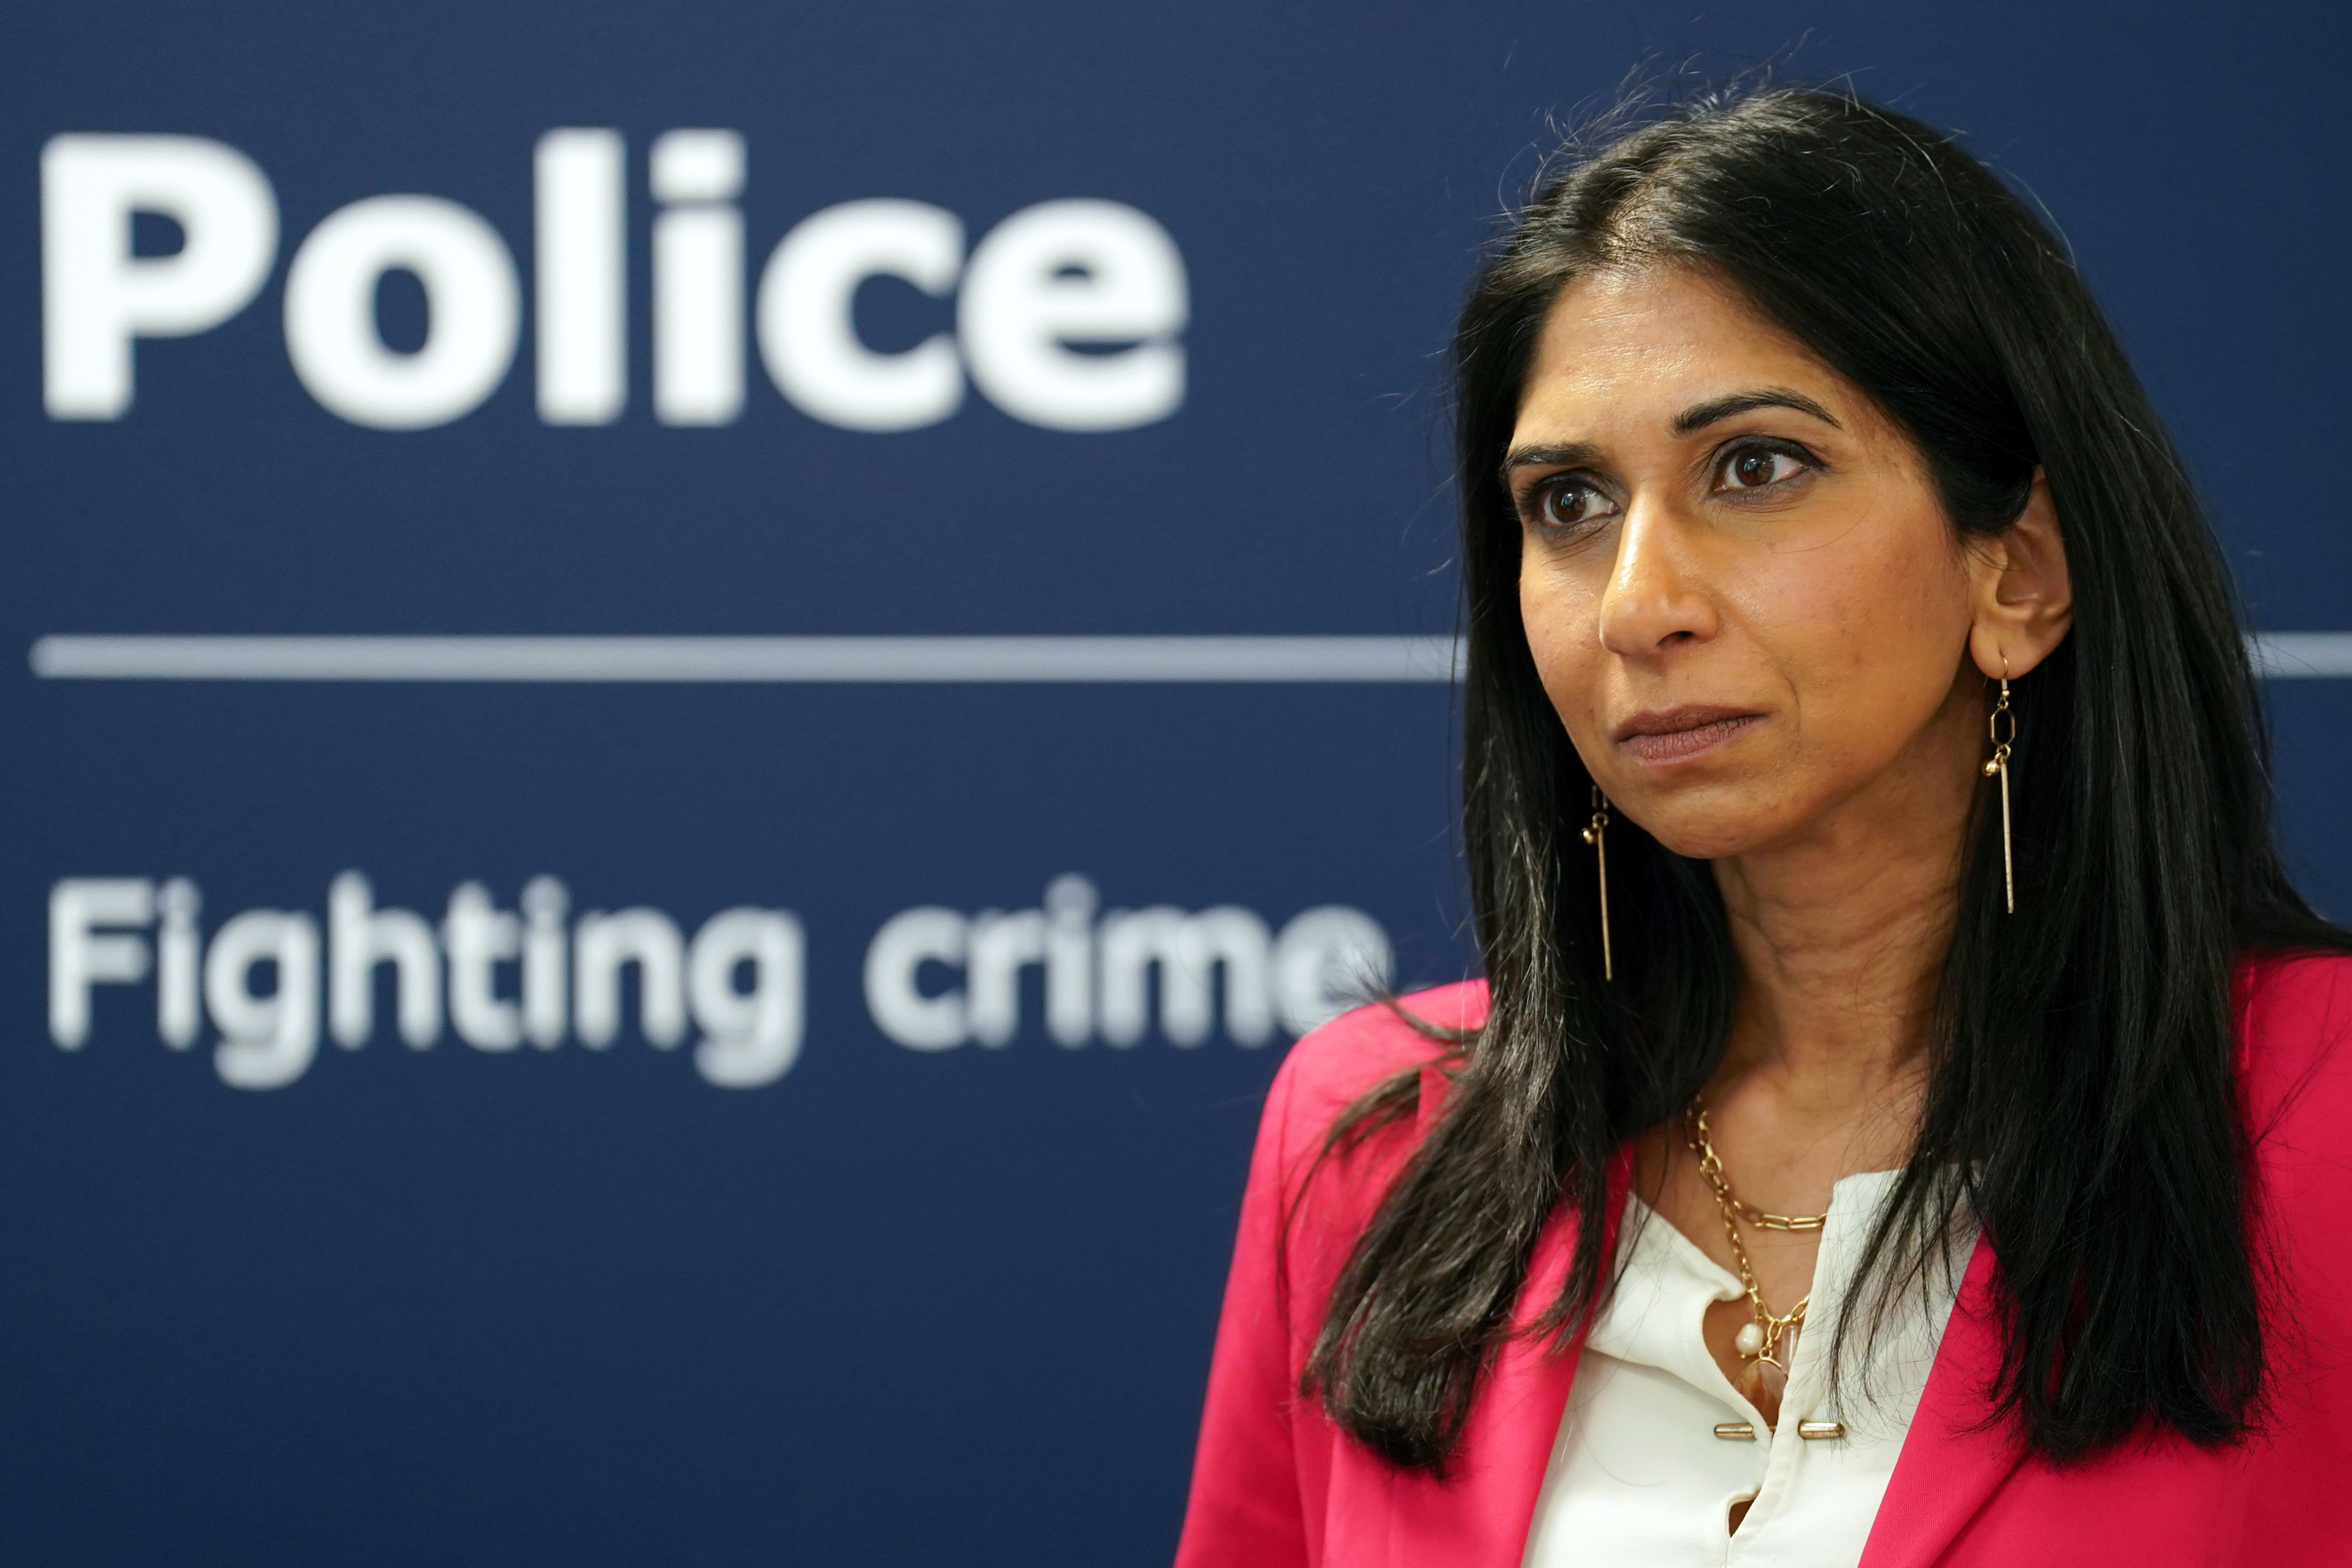 Suella Braverman says rogue officers ‘must be kicked out’